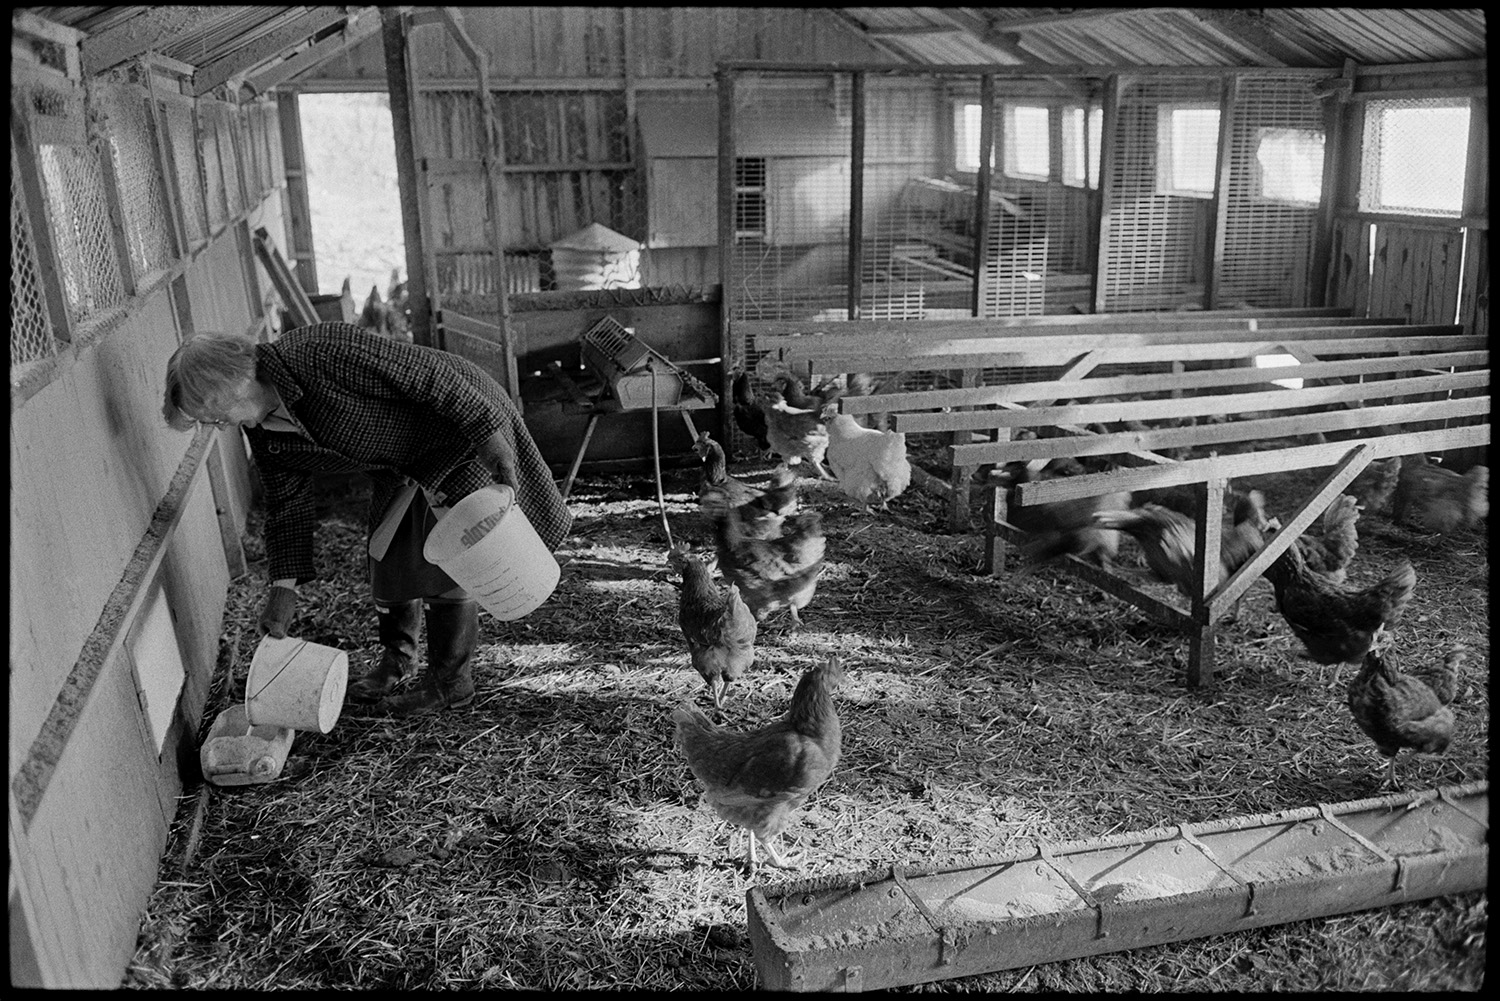 Woman, farmers wife collecting eggs in poultry house. 
[May Pugsley filling a water or feed bowl for chickens in a large wooden poultry house at Lower Langham, Dolton.]